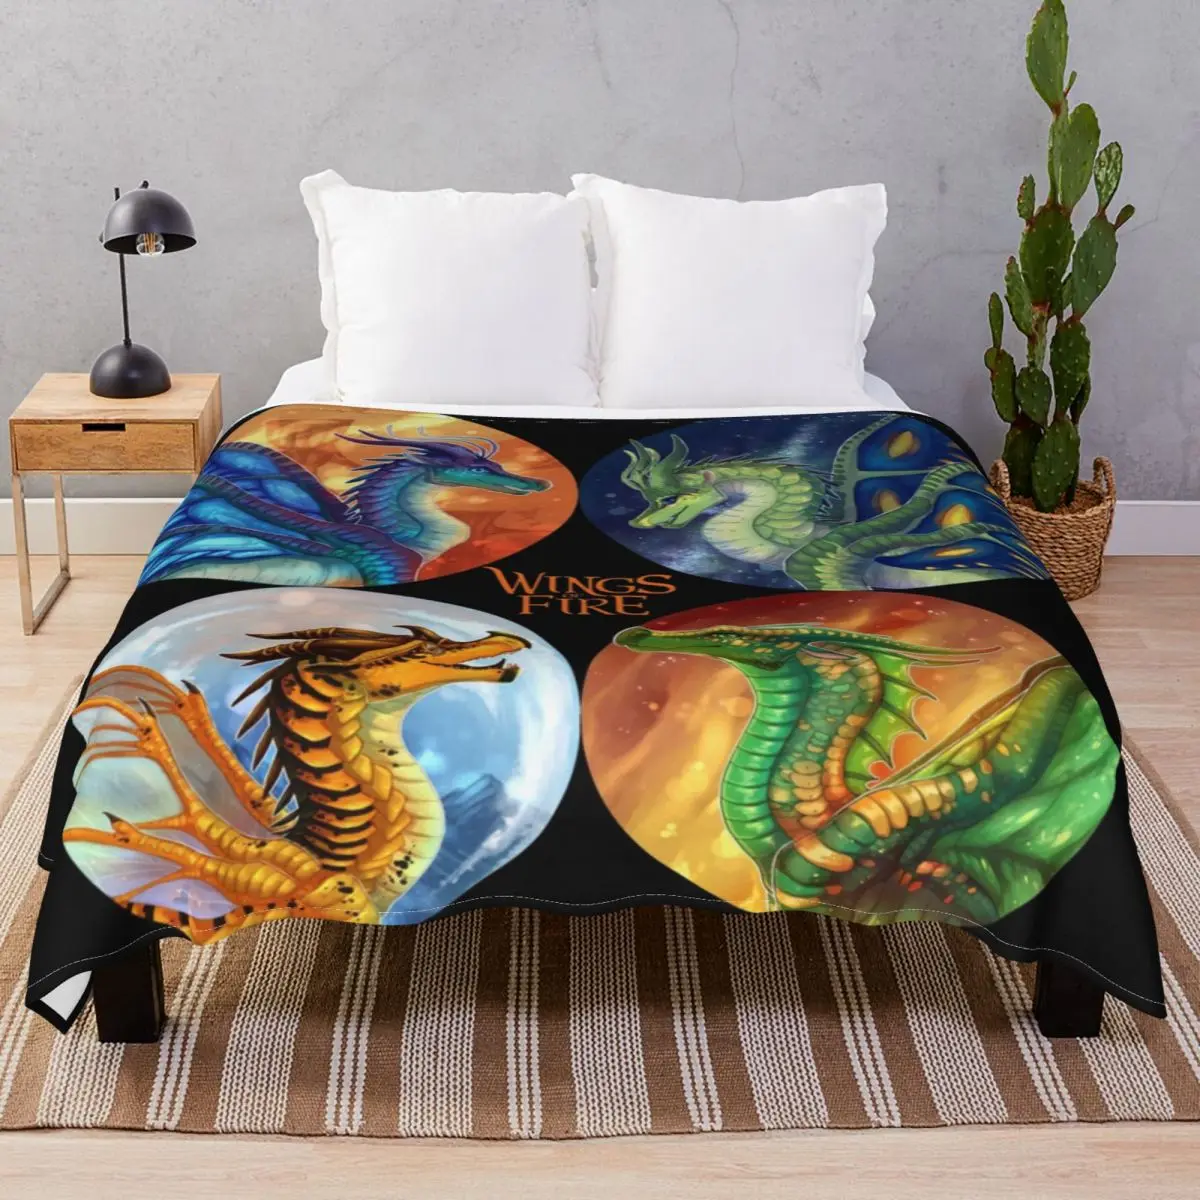 Wings Of Fire Blankets Coral Fleece All Season Breathable Throw Blanket for Bed Home Couch Travel Cinema